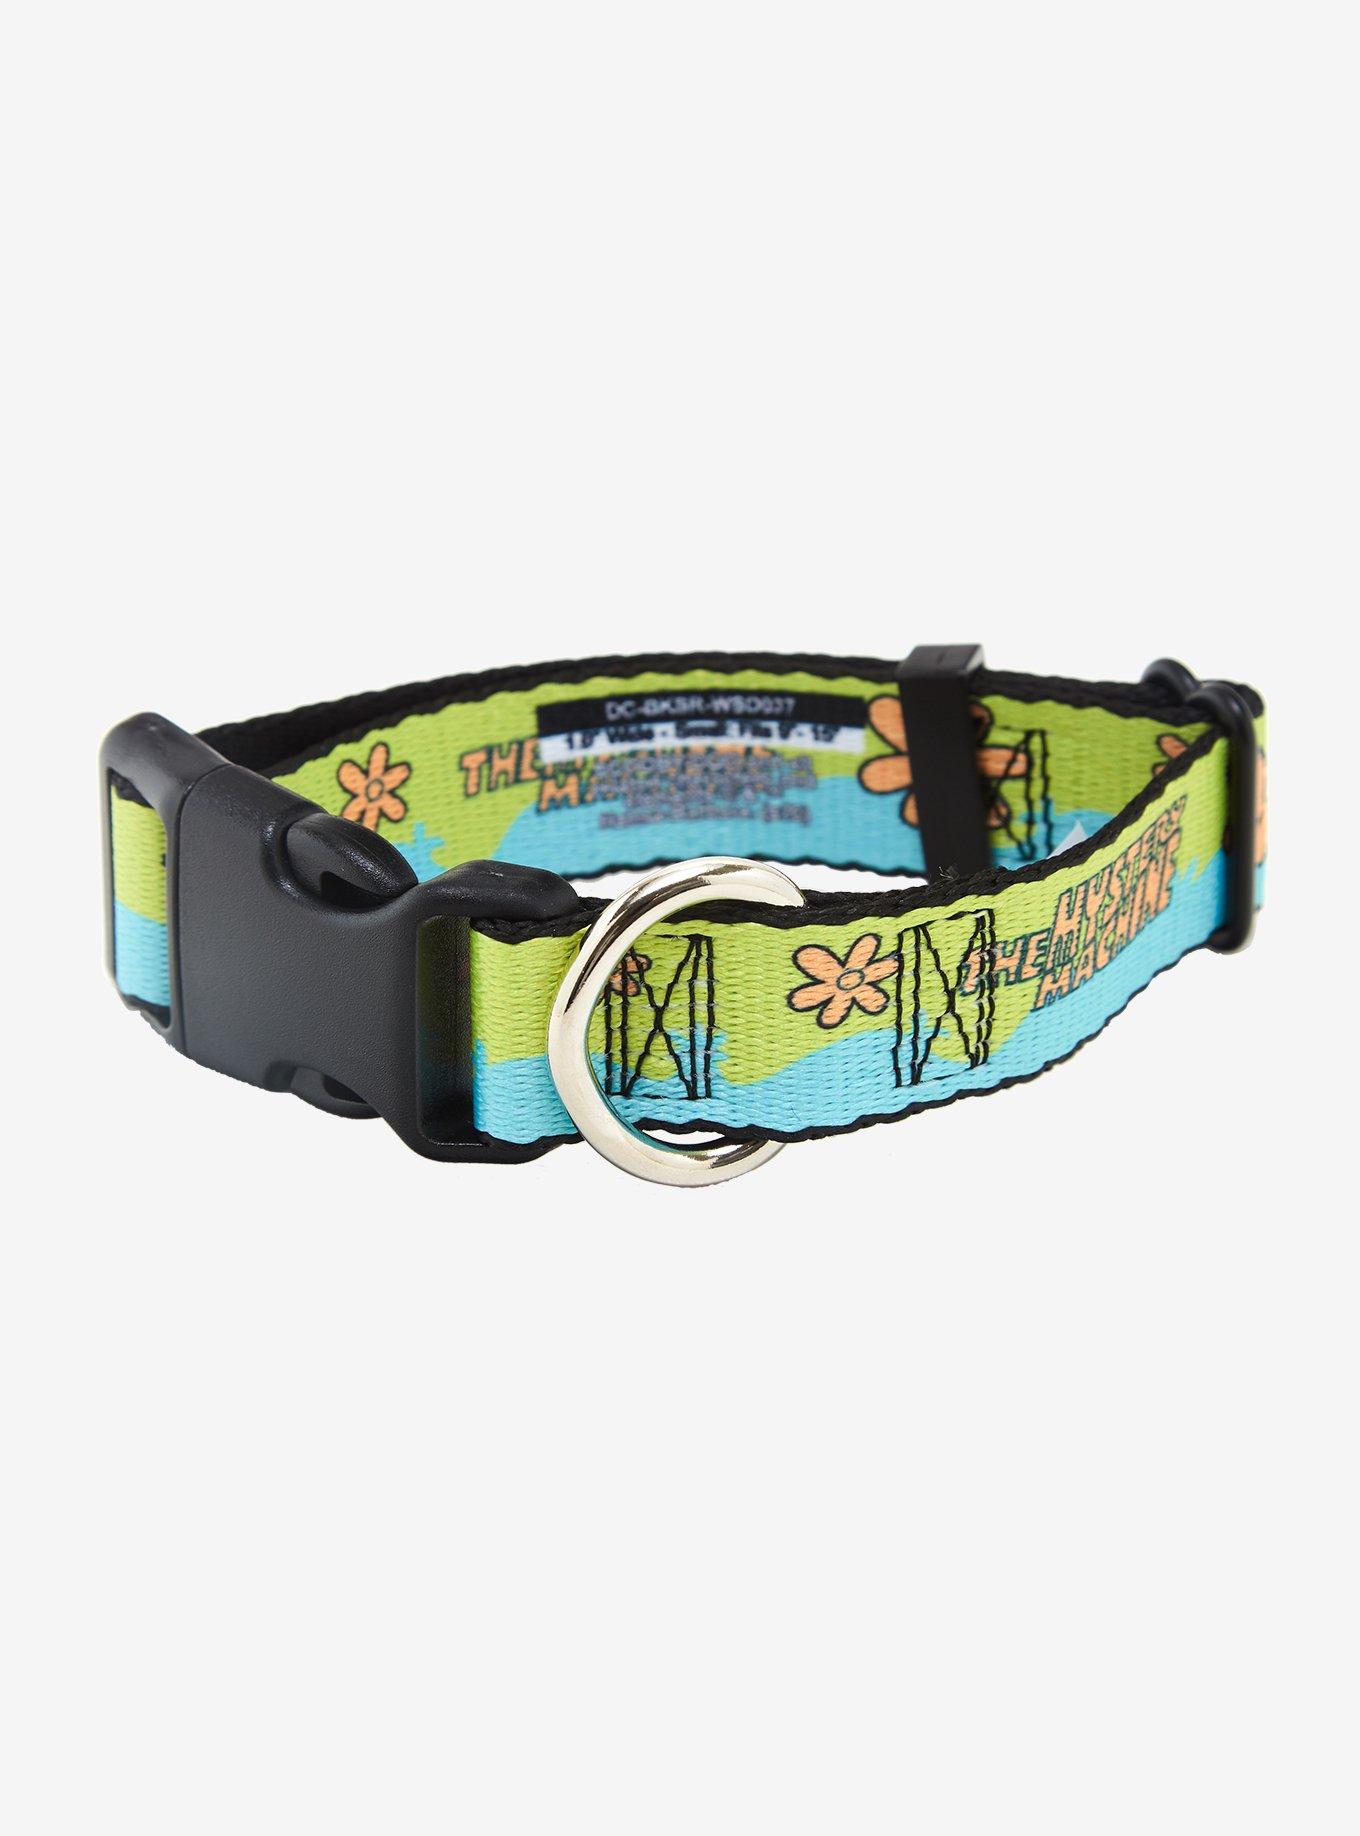 Star Wars The Mandalorian The Child Medium Dog Collar | Green Medium Baby Yoda Dog Collar | Dog Collar for Medium Size Dogs with D-Ring Cute Dog Appar